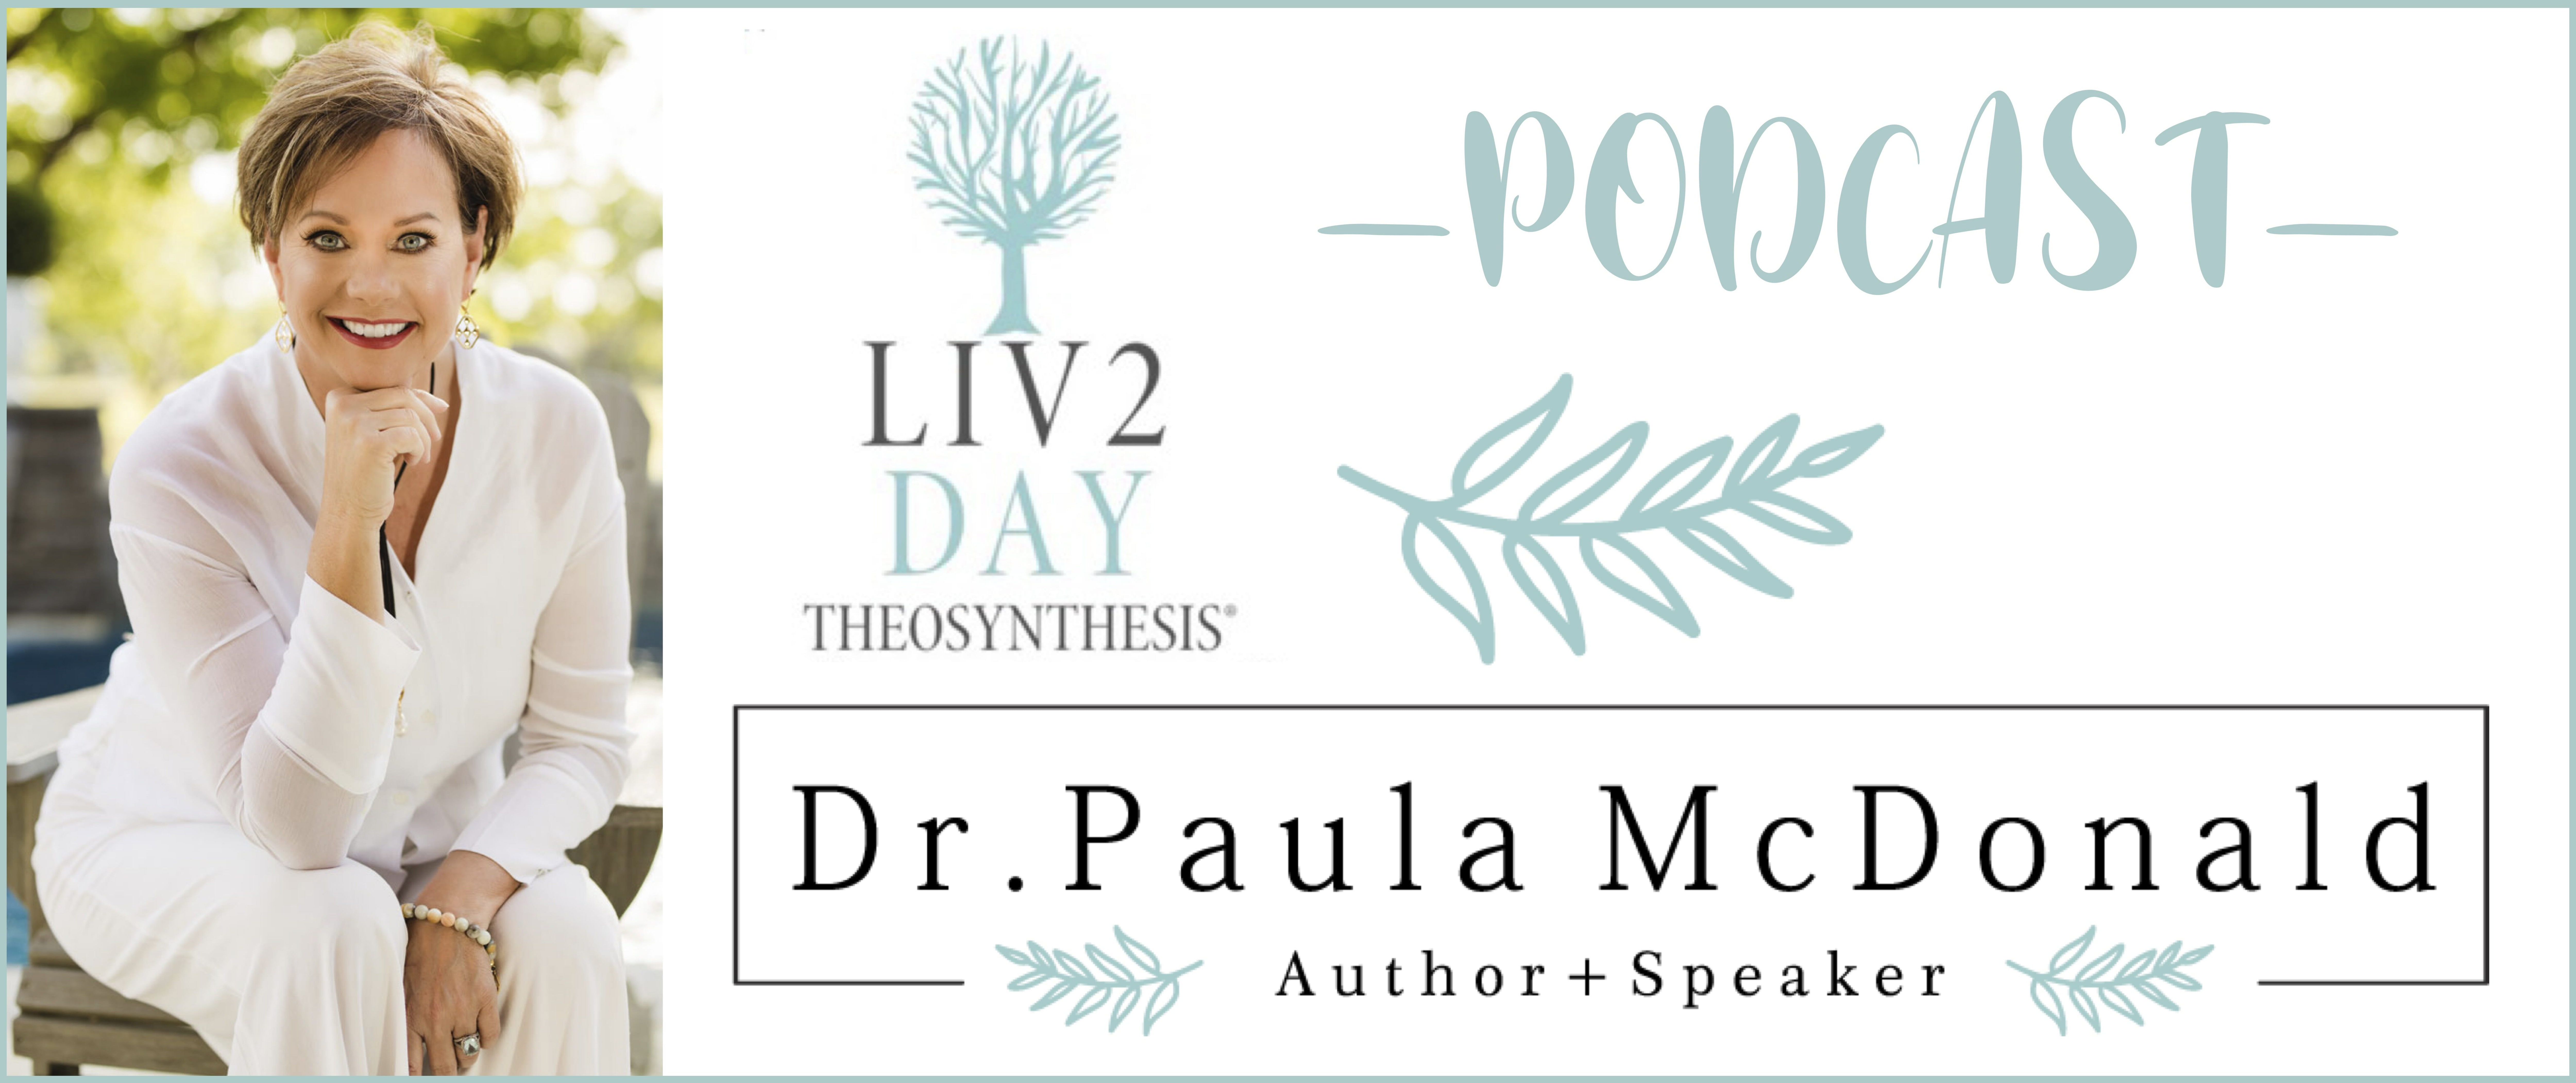 LIV2DAY: Numbers + God